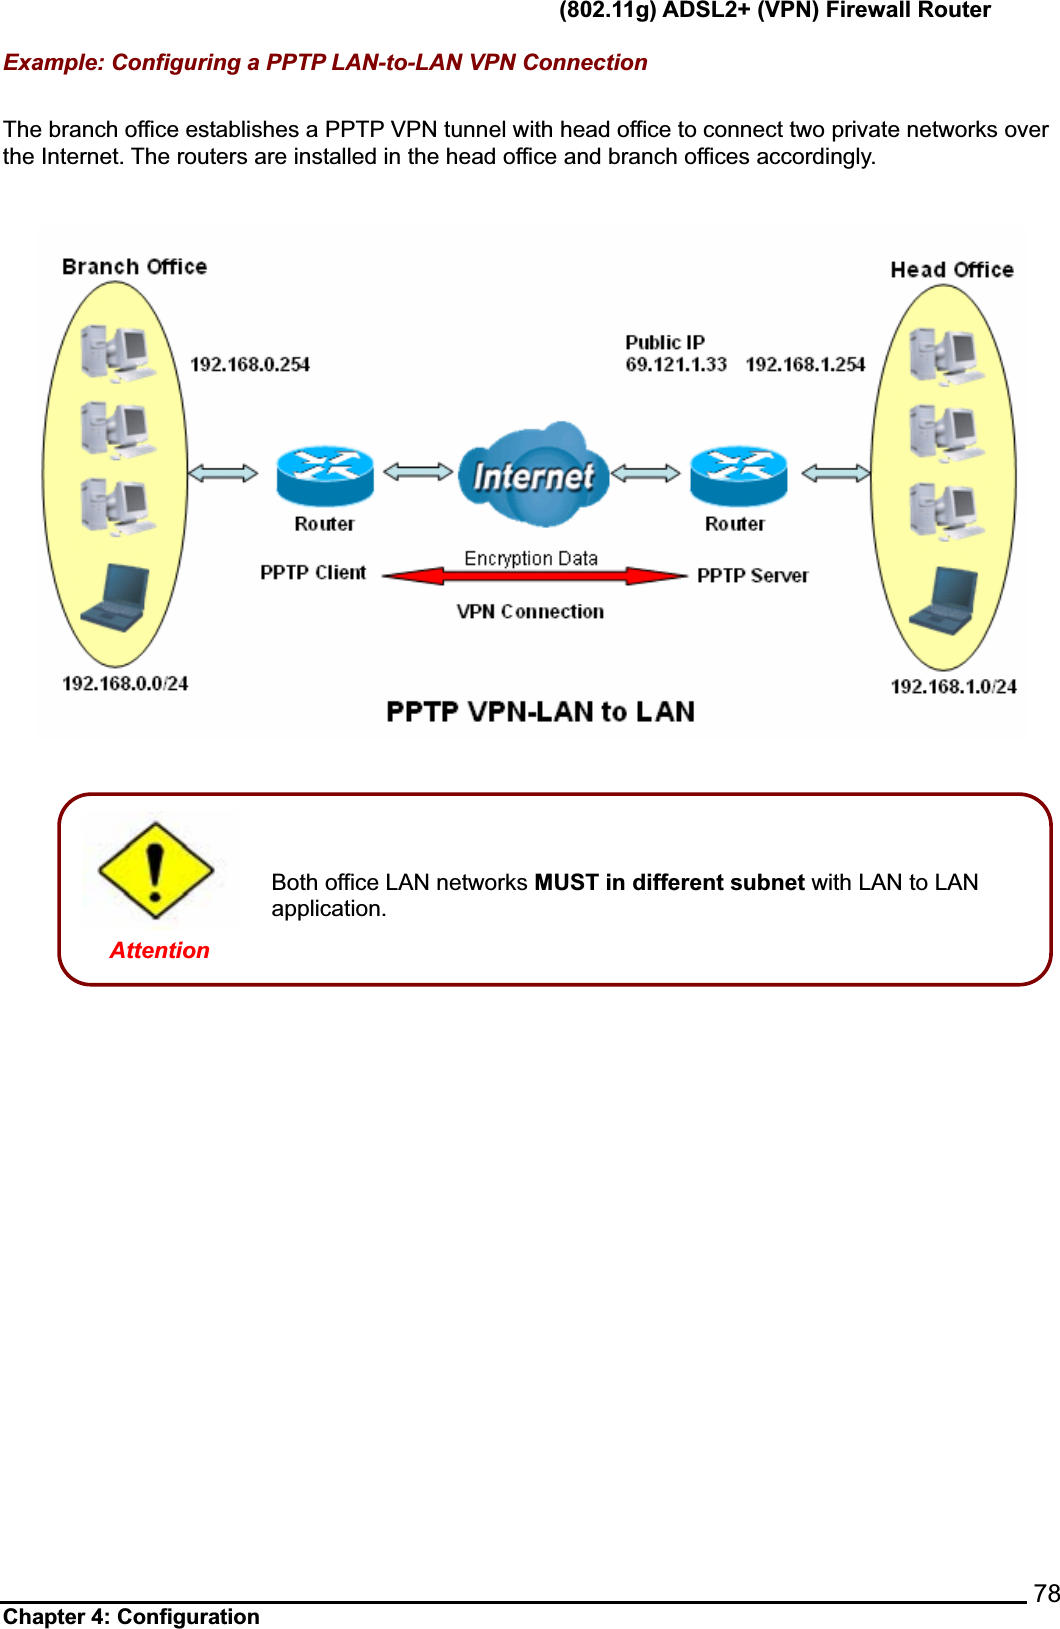      (802.11g) ADSL2+ (VPN) Firewall Router Chapter 4: Configuration    78Example: Configuring a PPTP LAN-to-LAN VPN Connection The branch office establishes a PPTP VPN tunnel with head office to connect two private networks over the Internet. The routers are installed in the head office and branch offices accordingly.Both office LAN networks MUST in different subnet with LAN to LAN application. Attention